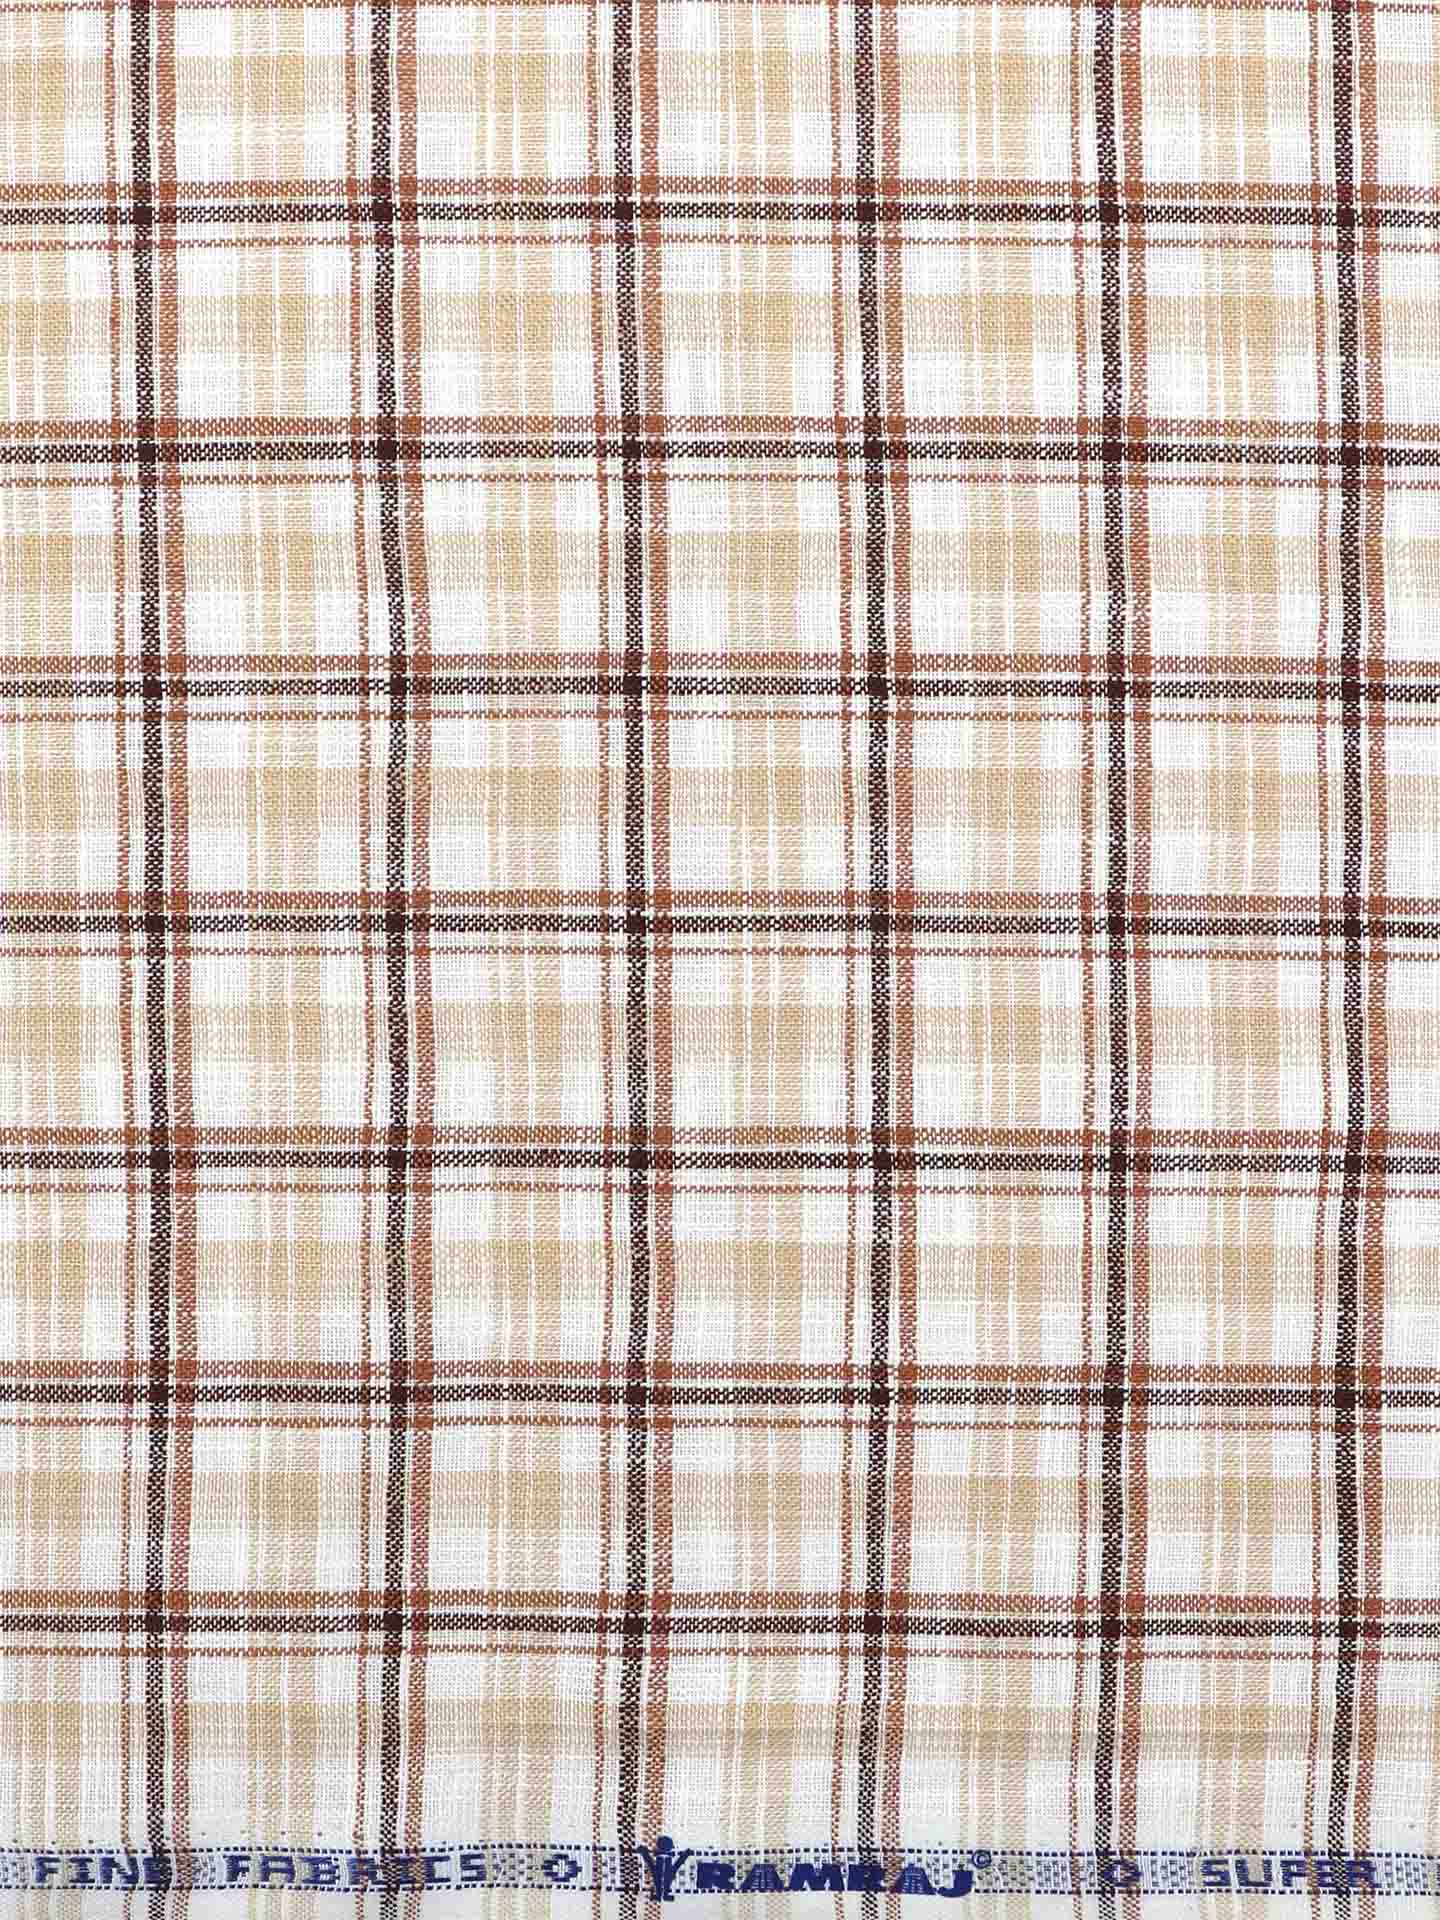 Cotton Colour Check Brown & Sandal Shirting Fabric High Style-Zoomv iew